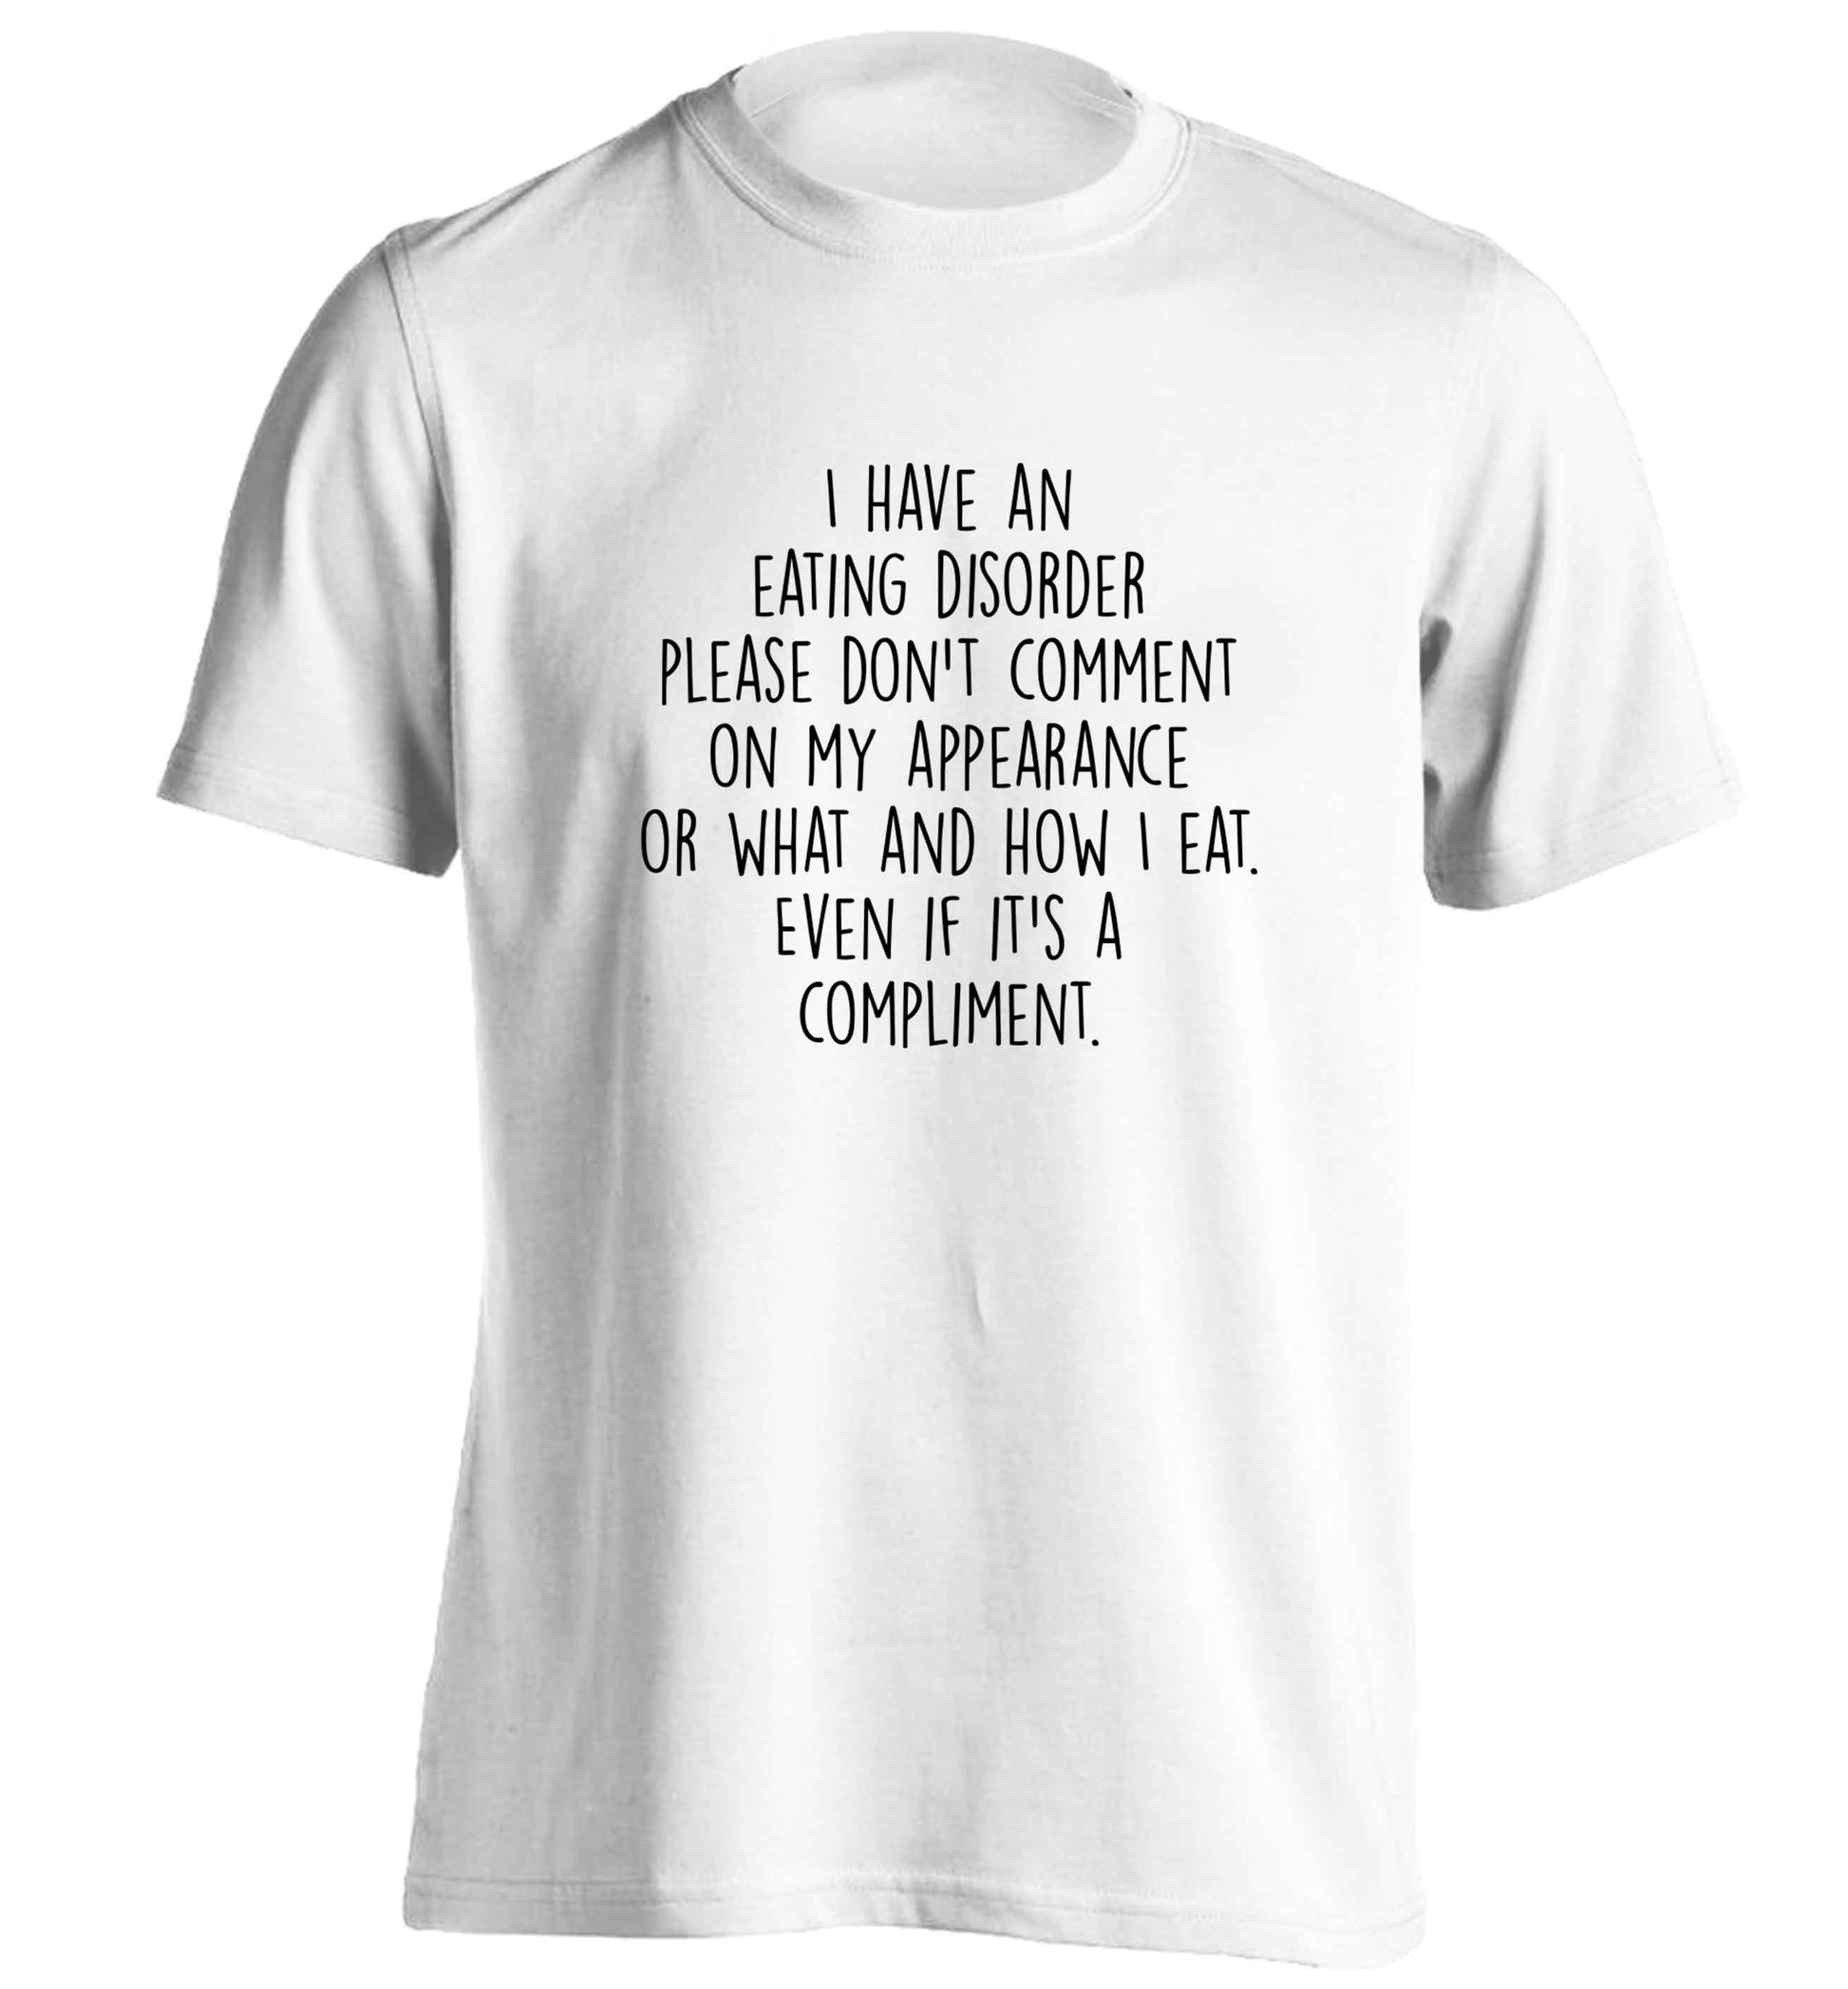 I have an eating disorder please don't comment on my appearance or what and how I eat. Even if it's a compliment adults unisex white Tshirt 2XL